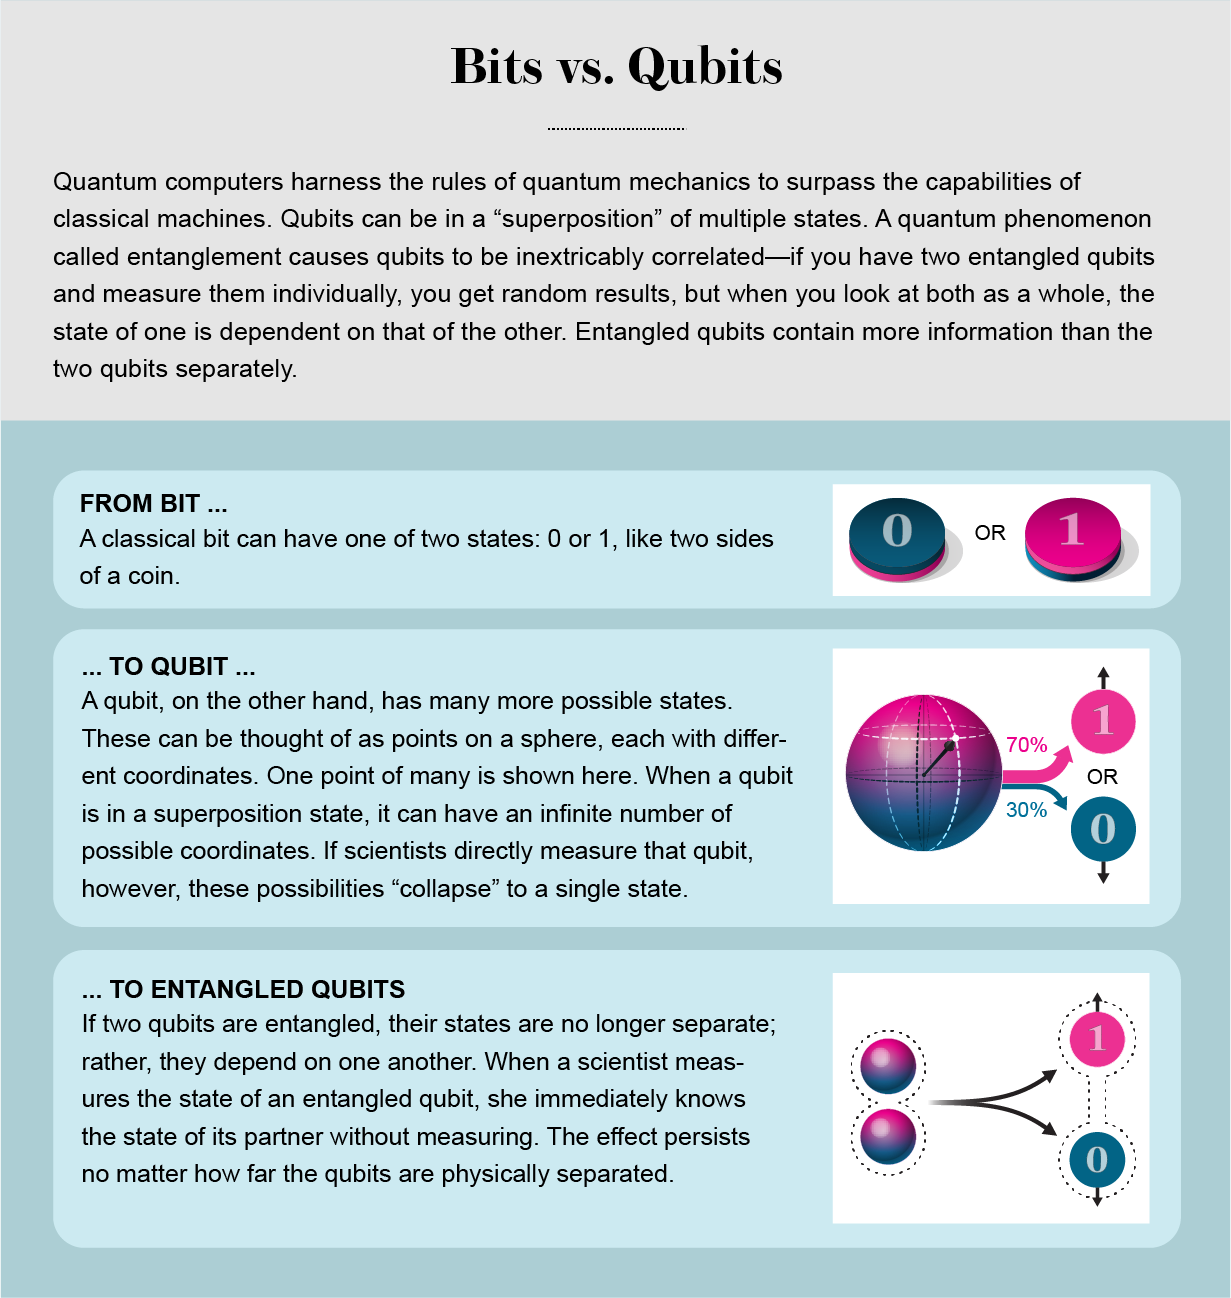 Graphic compares possible states of classical bits, qubits and entangled qubits.